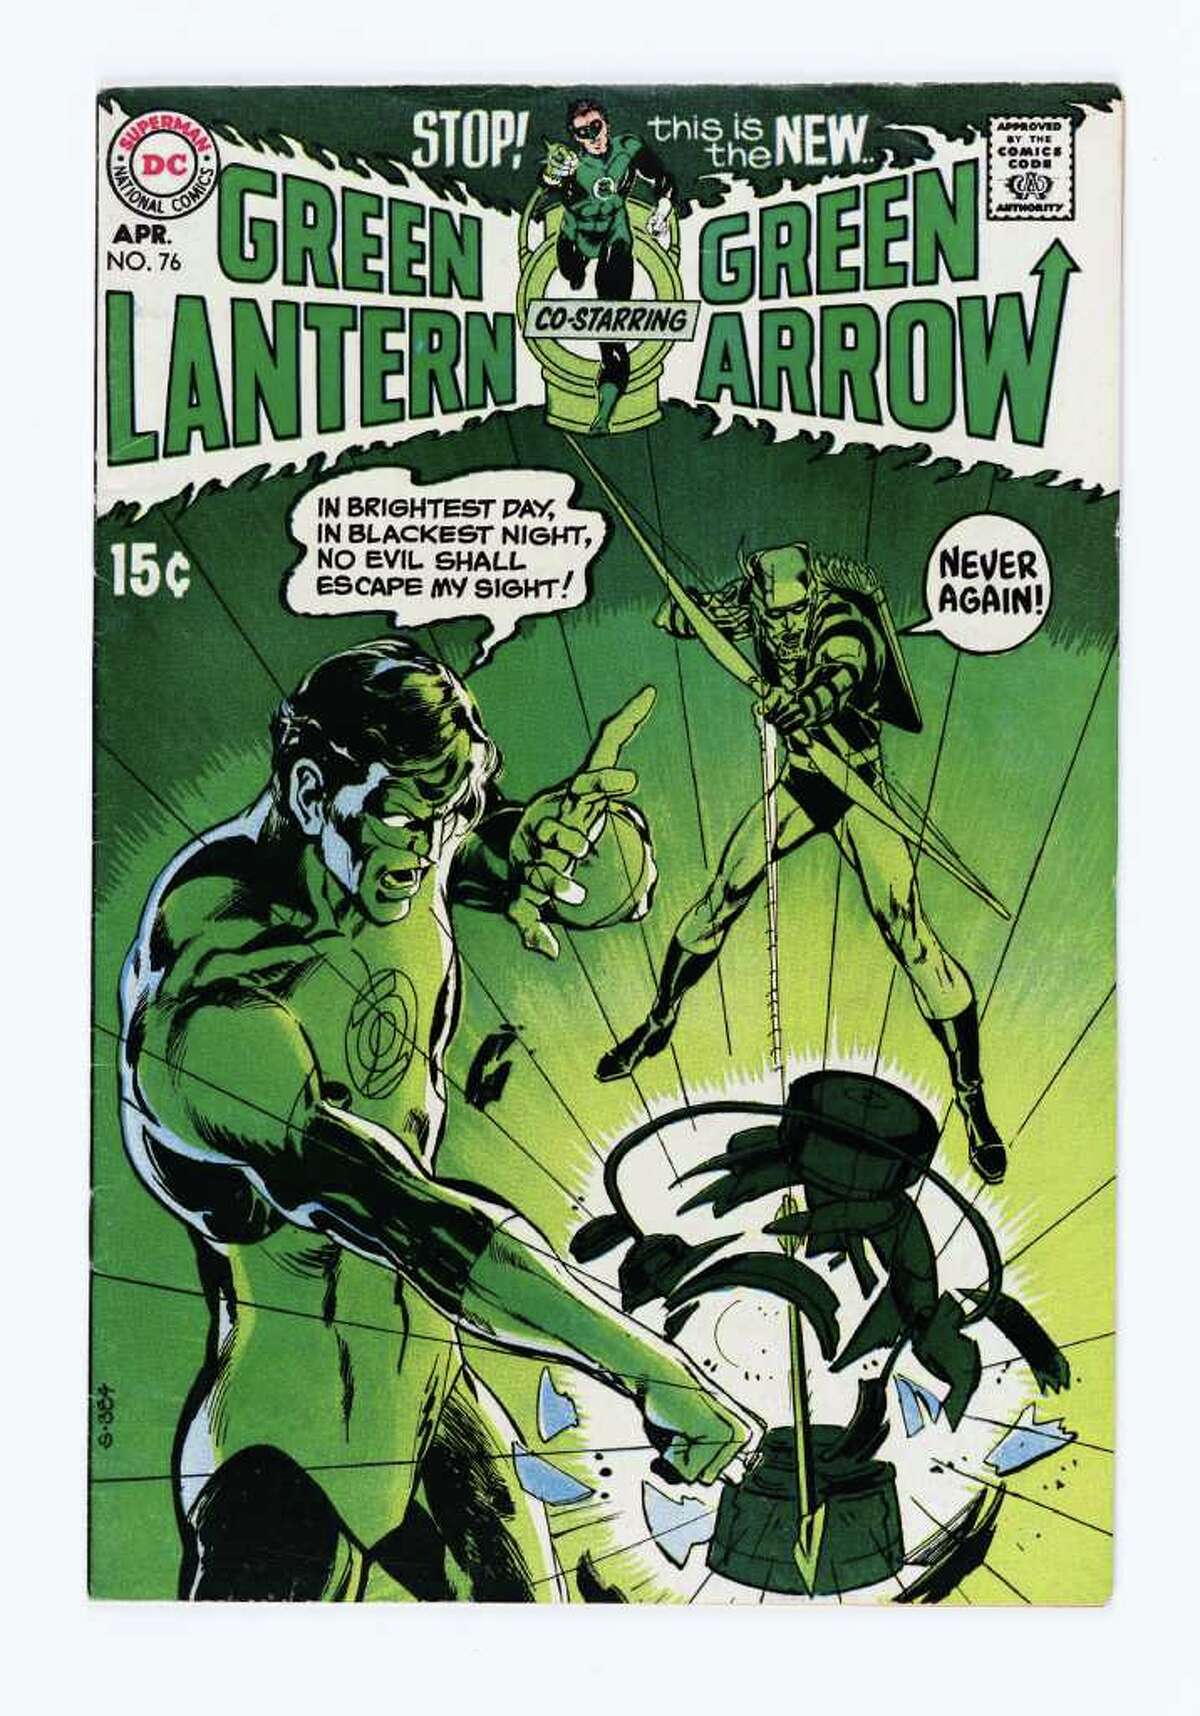 Neal Adams cover art for the April 1970 issue of Green Lantern. In the '70s, the conservative Green Lantern often butted heads with the liberal Green Arrow.